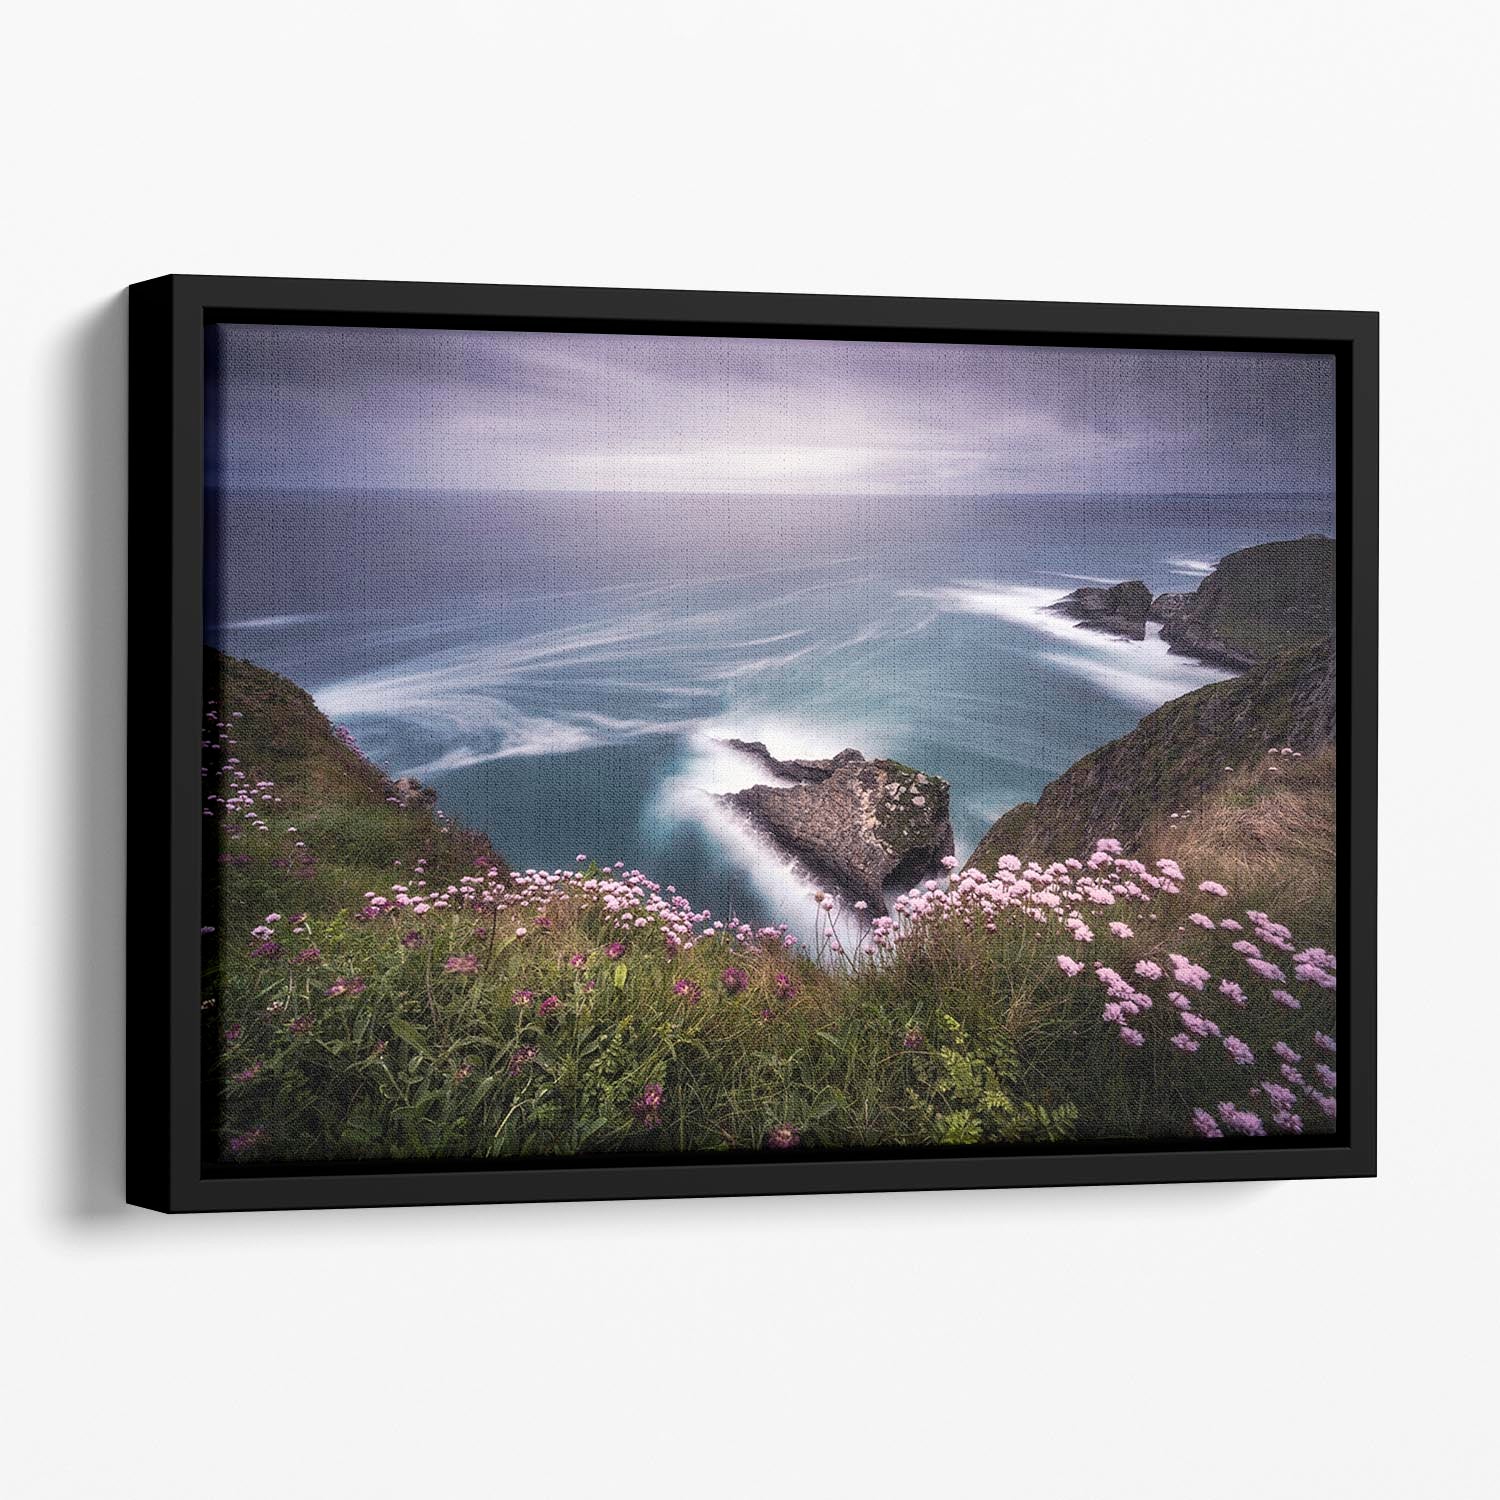 On The Edge Of The Cliff Floating Framed Canvas - Canvas Art Rocks - 1